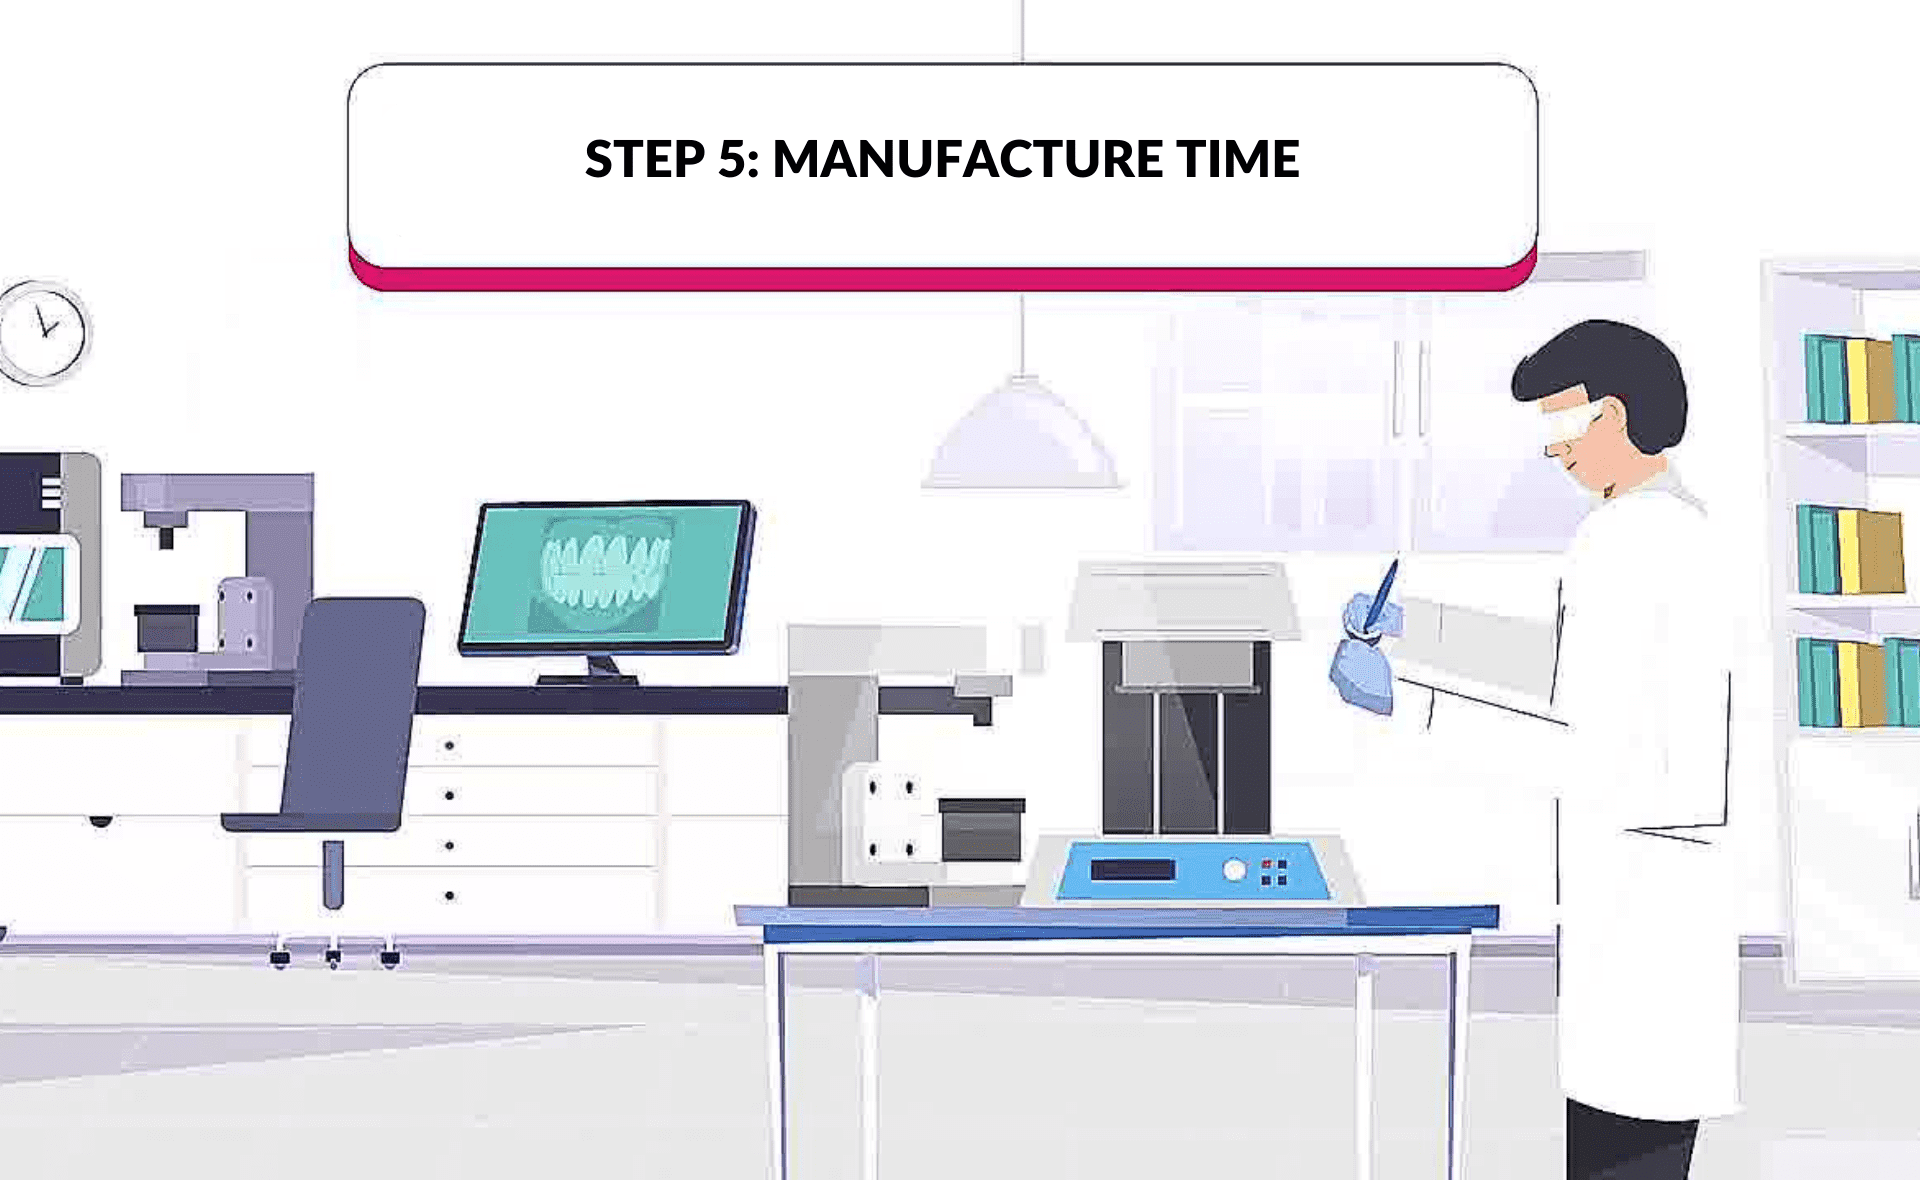 Step 5: Manufacture Time